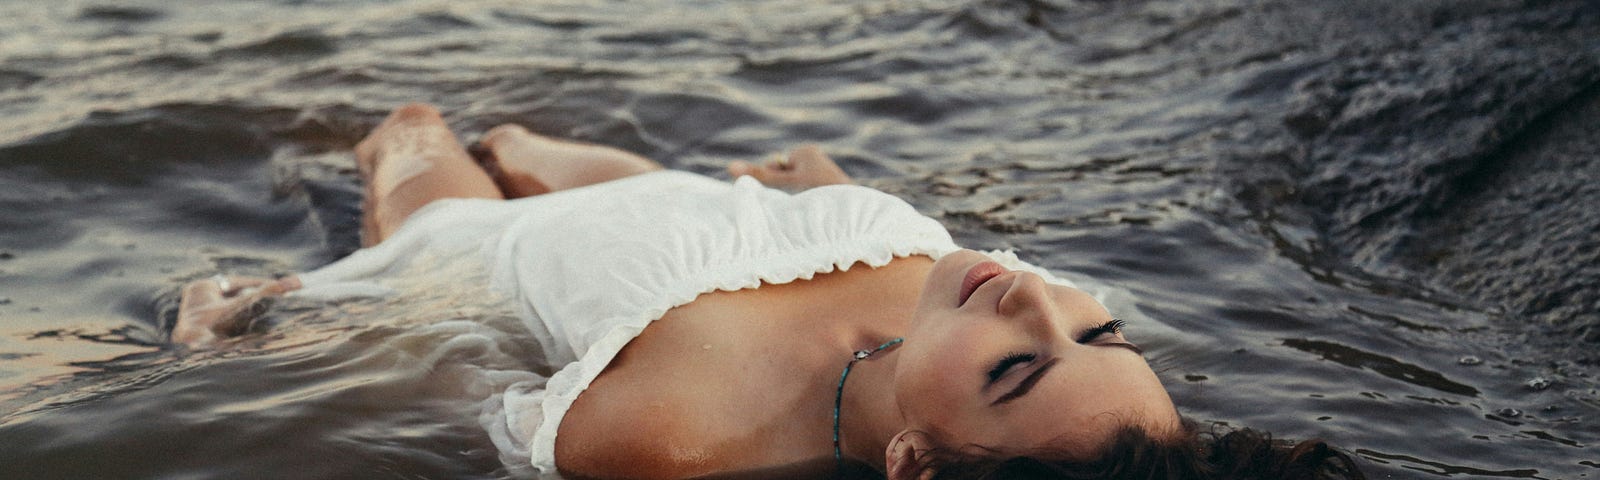 A woman in a white dress floating peacefully in a body of water with her eyes closed and a serene expression, suggesting a moment of reflection or release. Her dark, curly hair fans out around her, and the water around her ripples gently, evoking a sense of calm and perhaps symbolizing a poignant moment of letting go or healing.